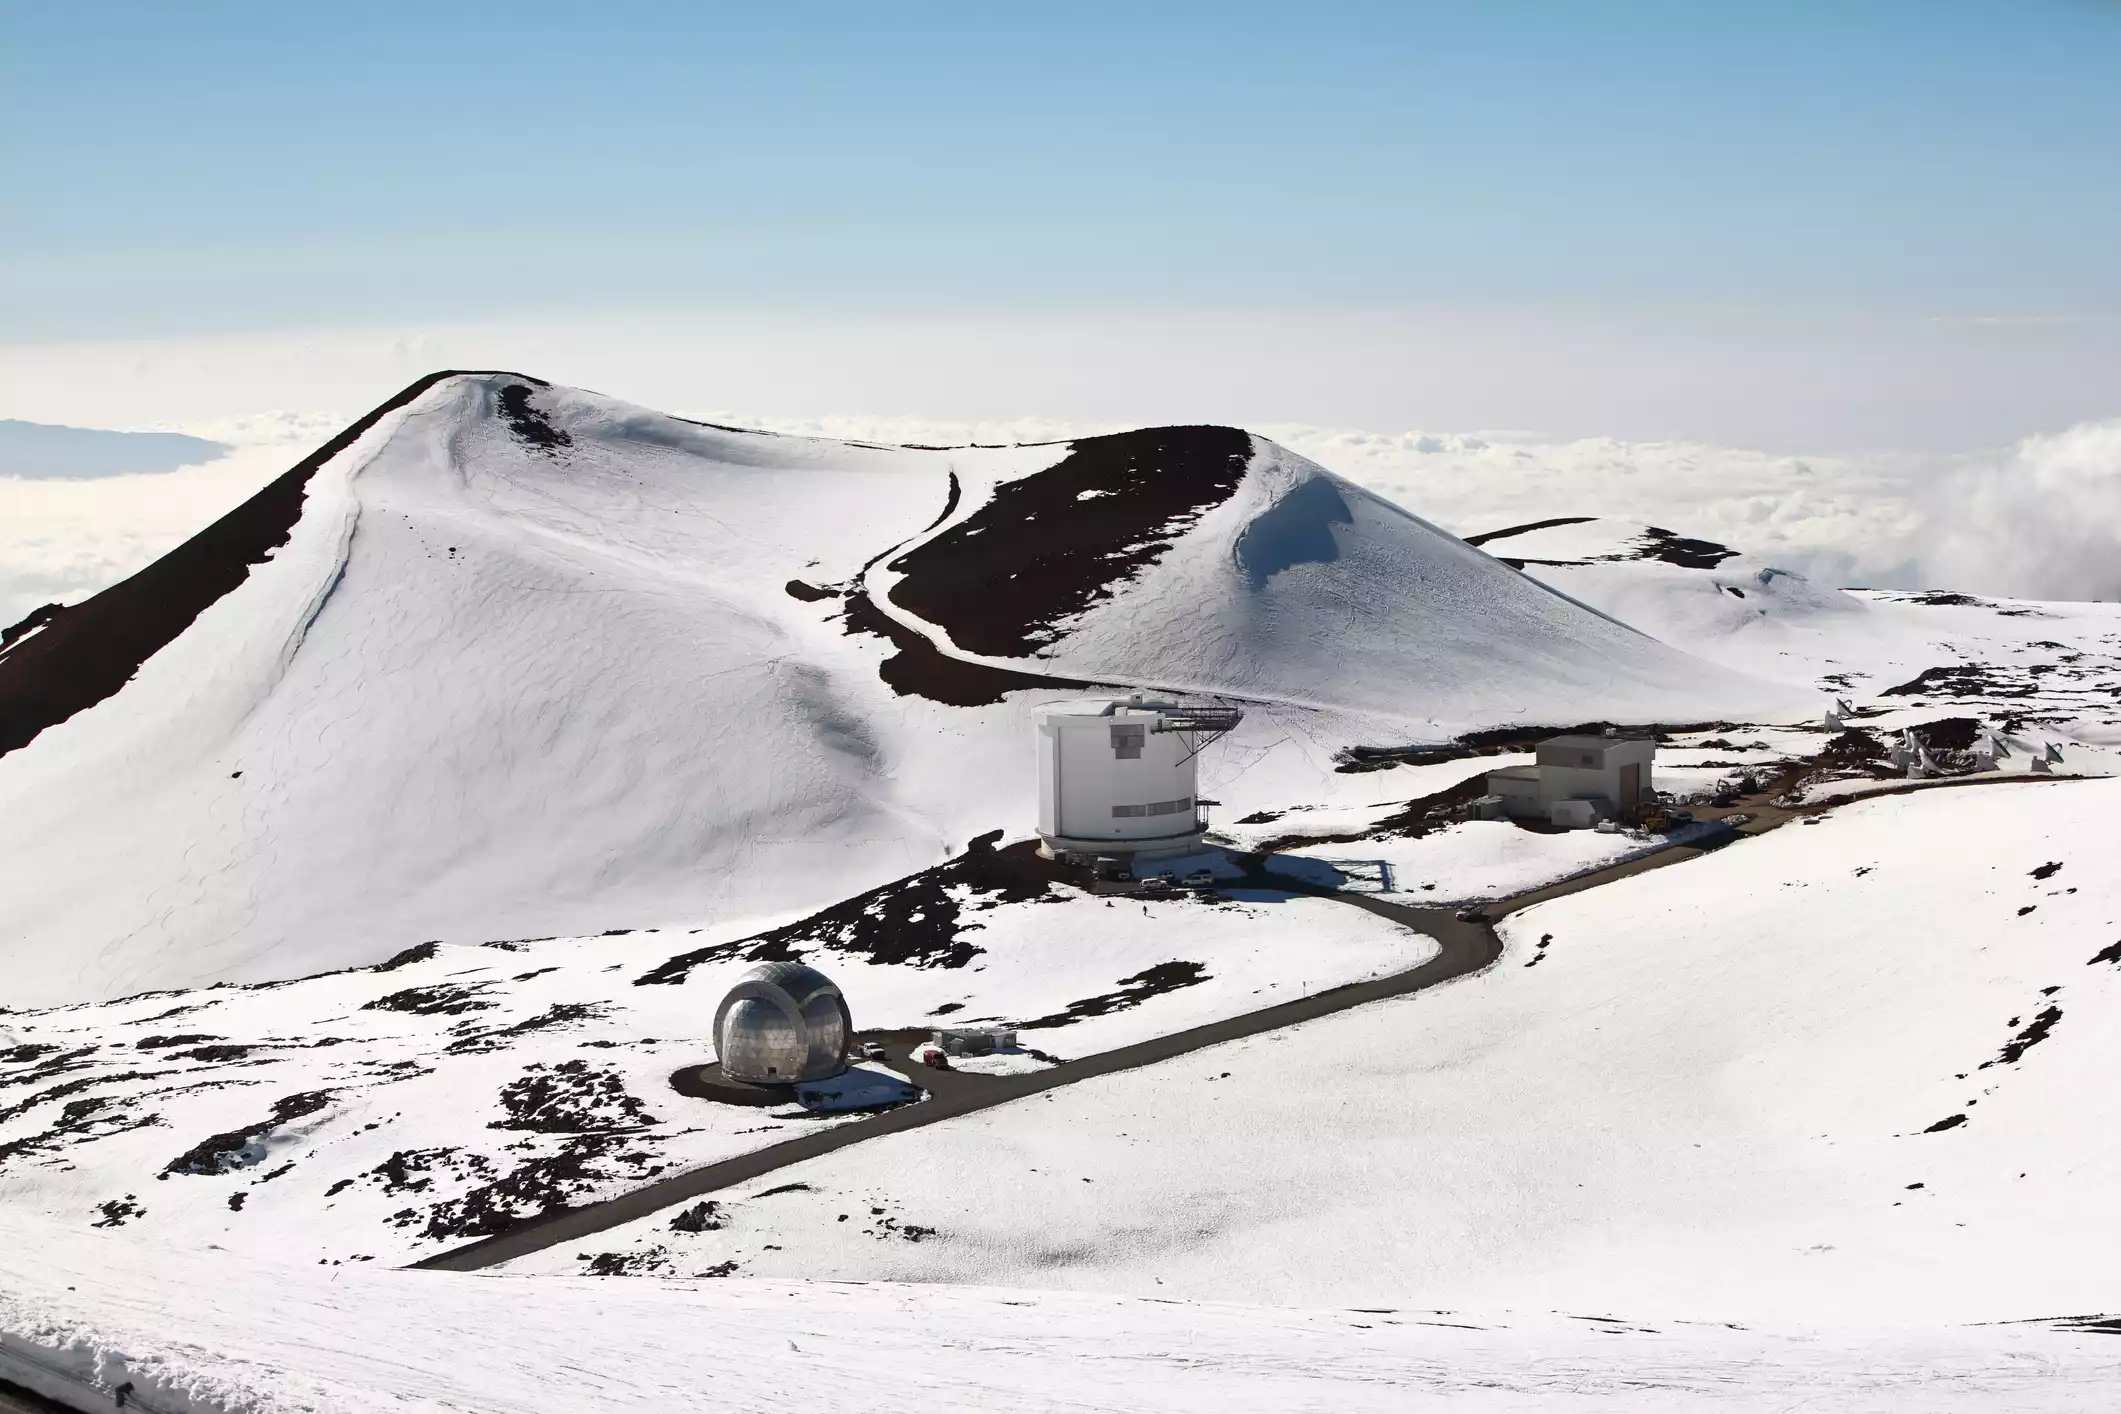 Mount Kea summit blanketed in white snow with some patches of brown dirt and light blue sky